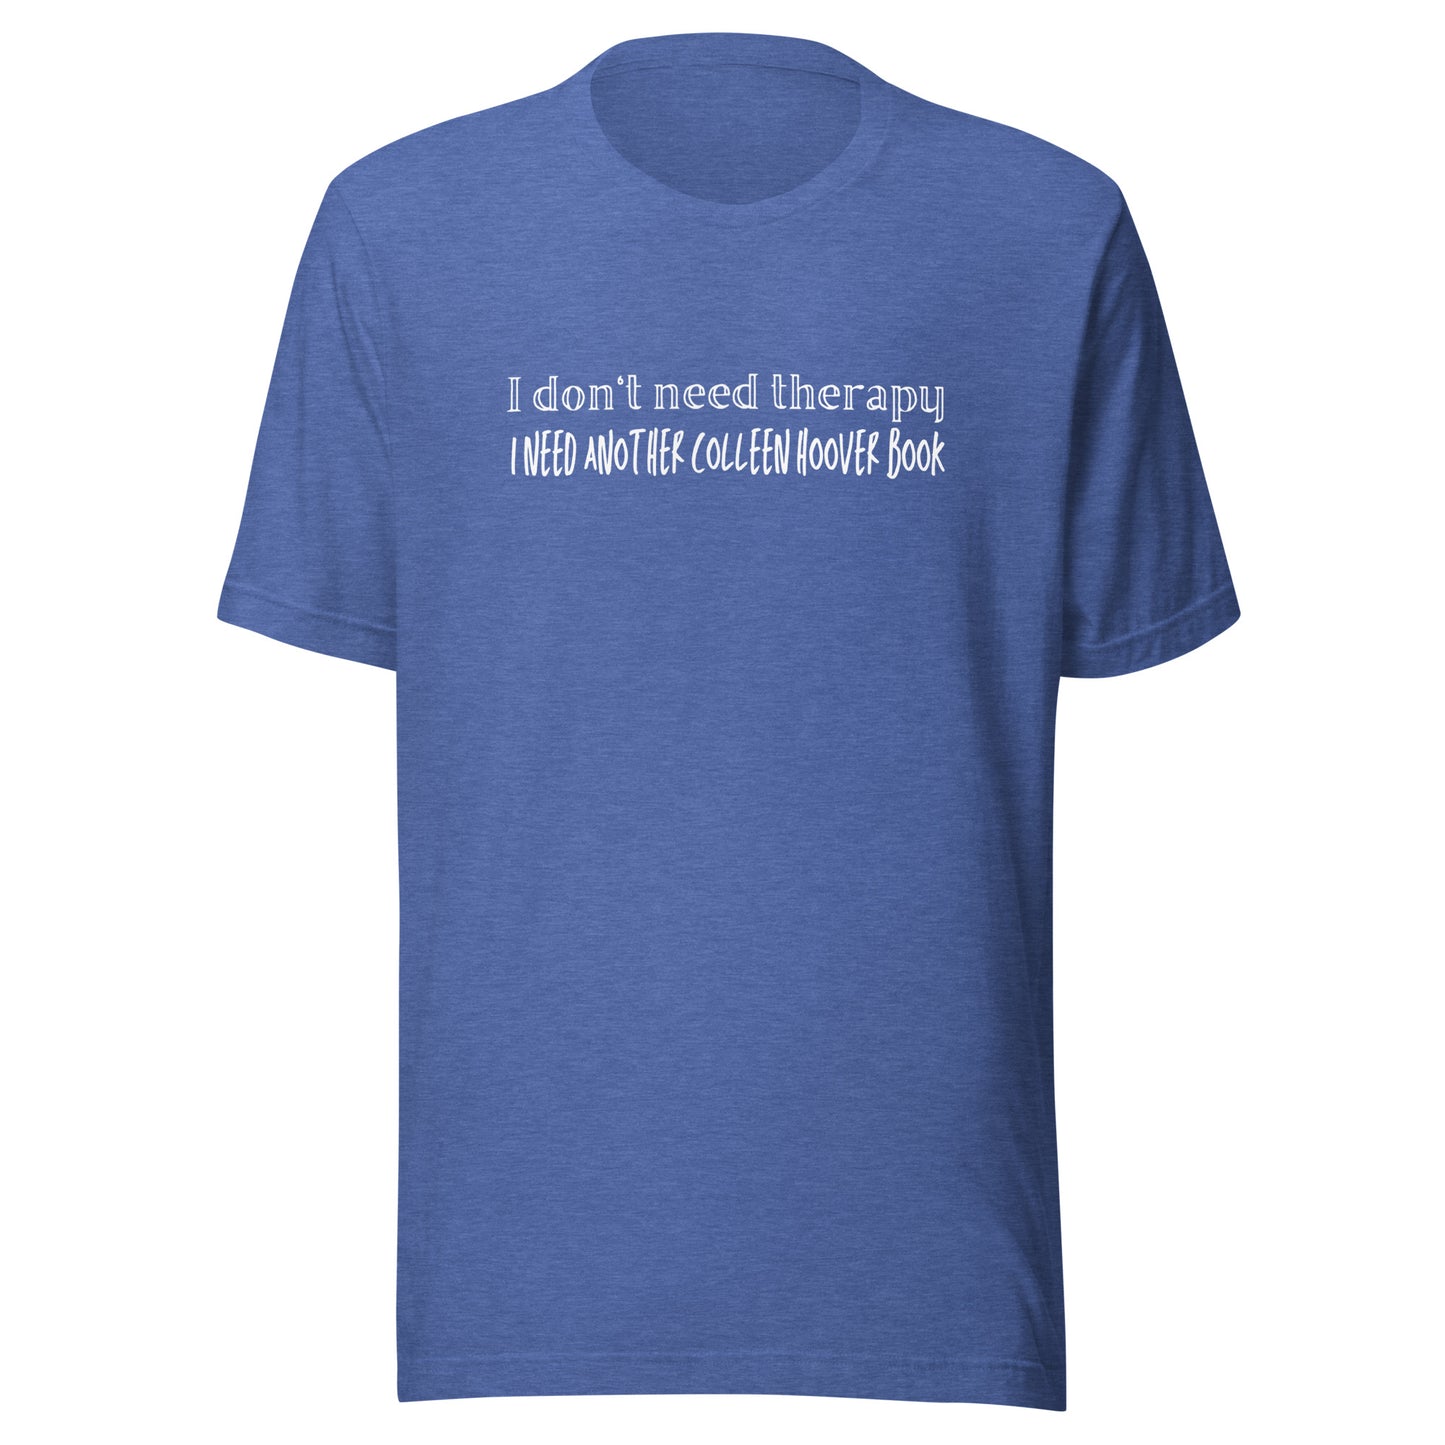 I don't need therapy I need another COHO book t-shirt